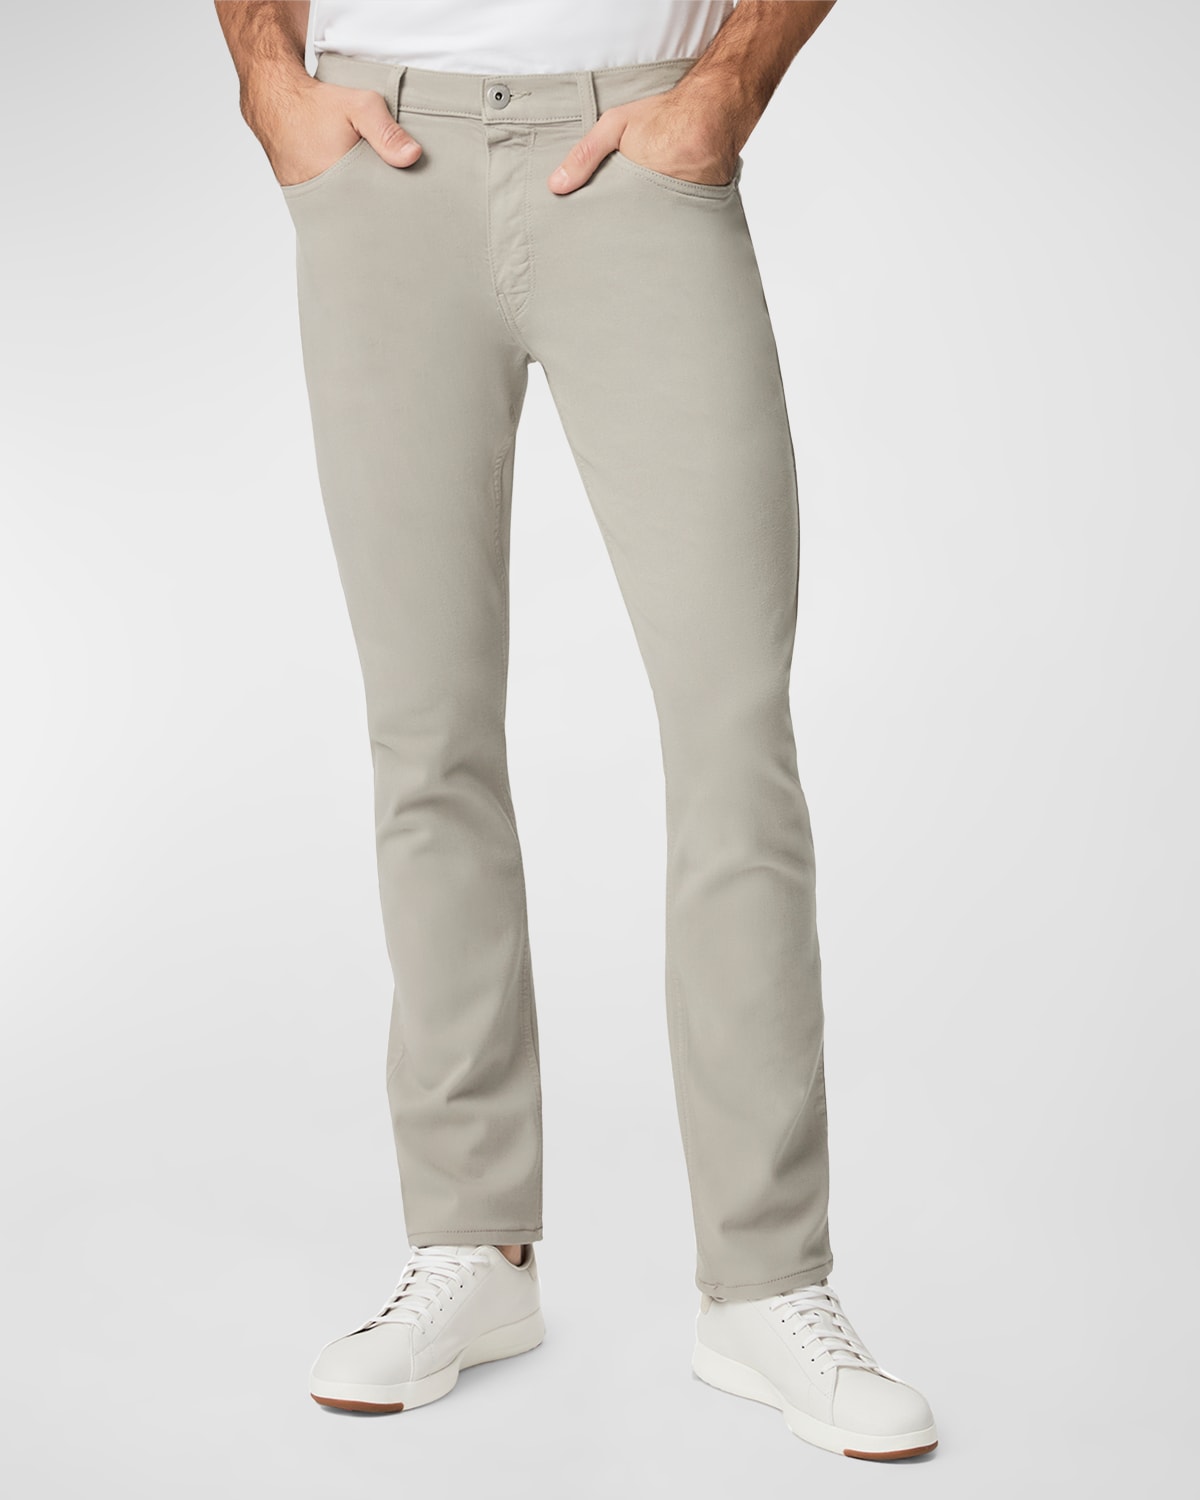 Paige Men's Federal Slim Straight Jeans In Stc Grey